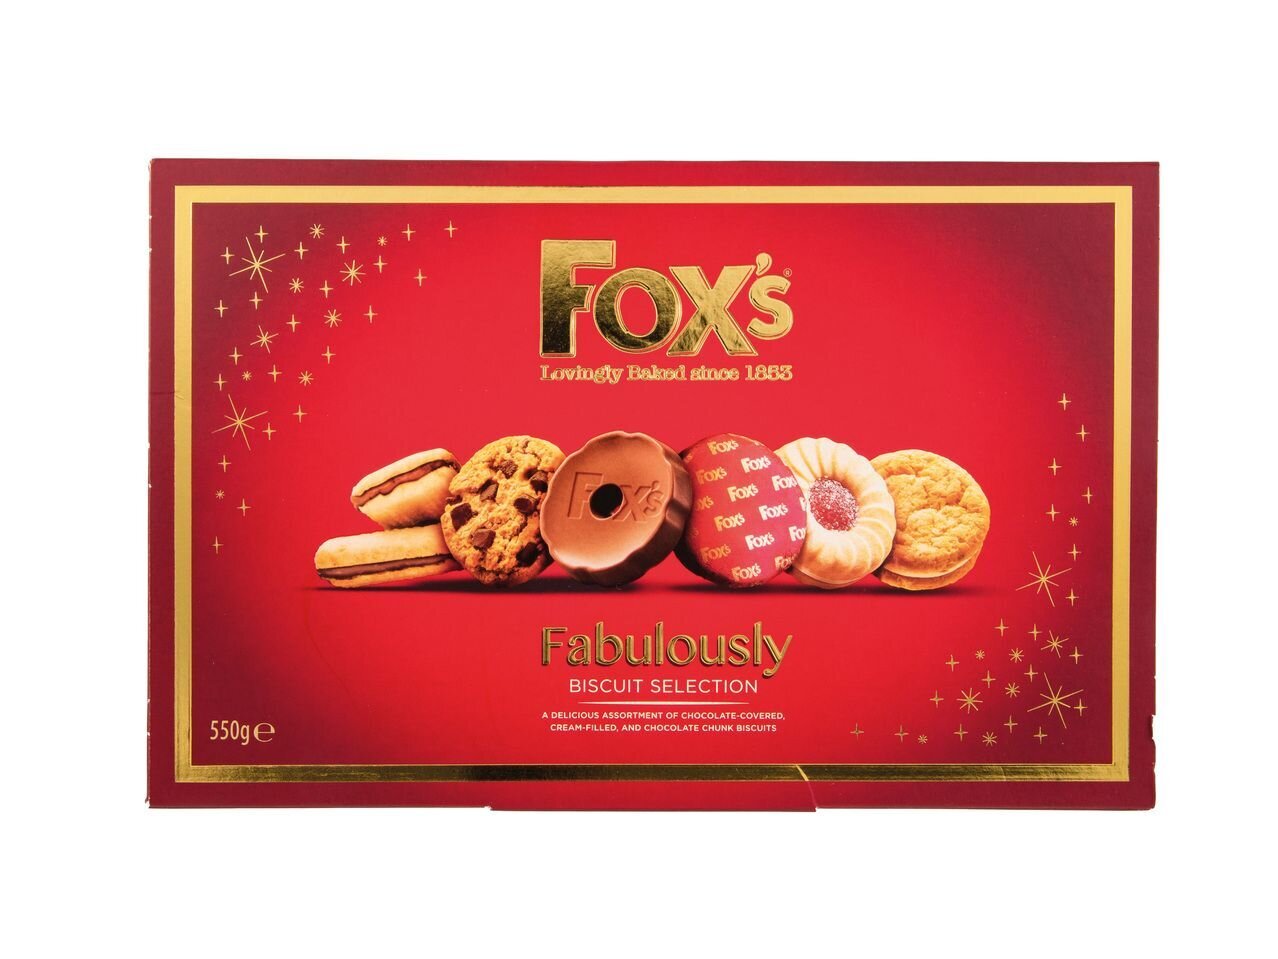 Foxs Fabulously Biscuit Selection 550g